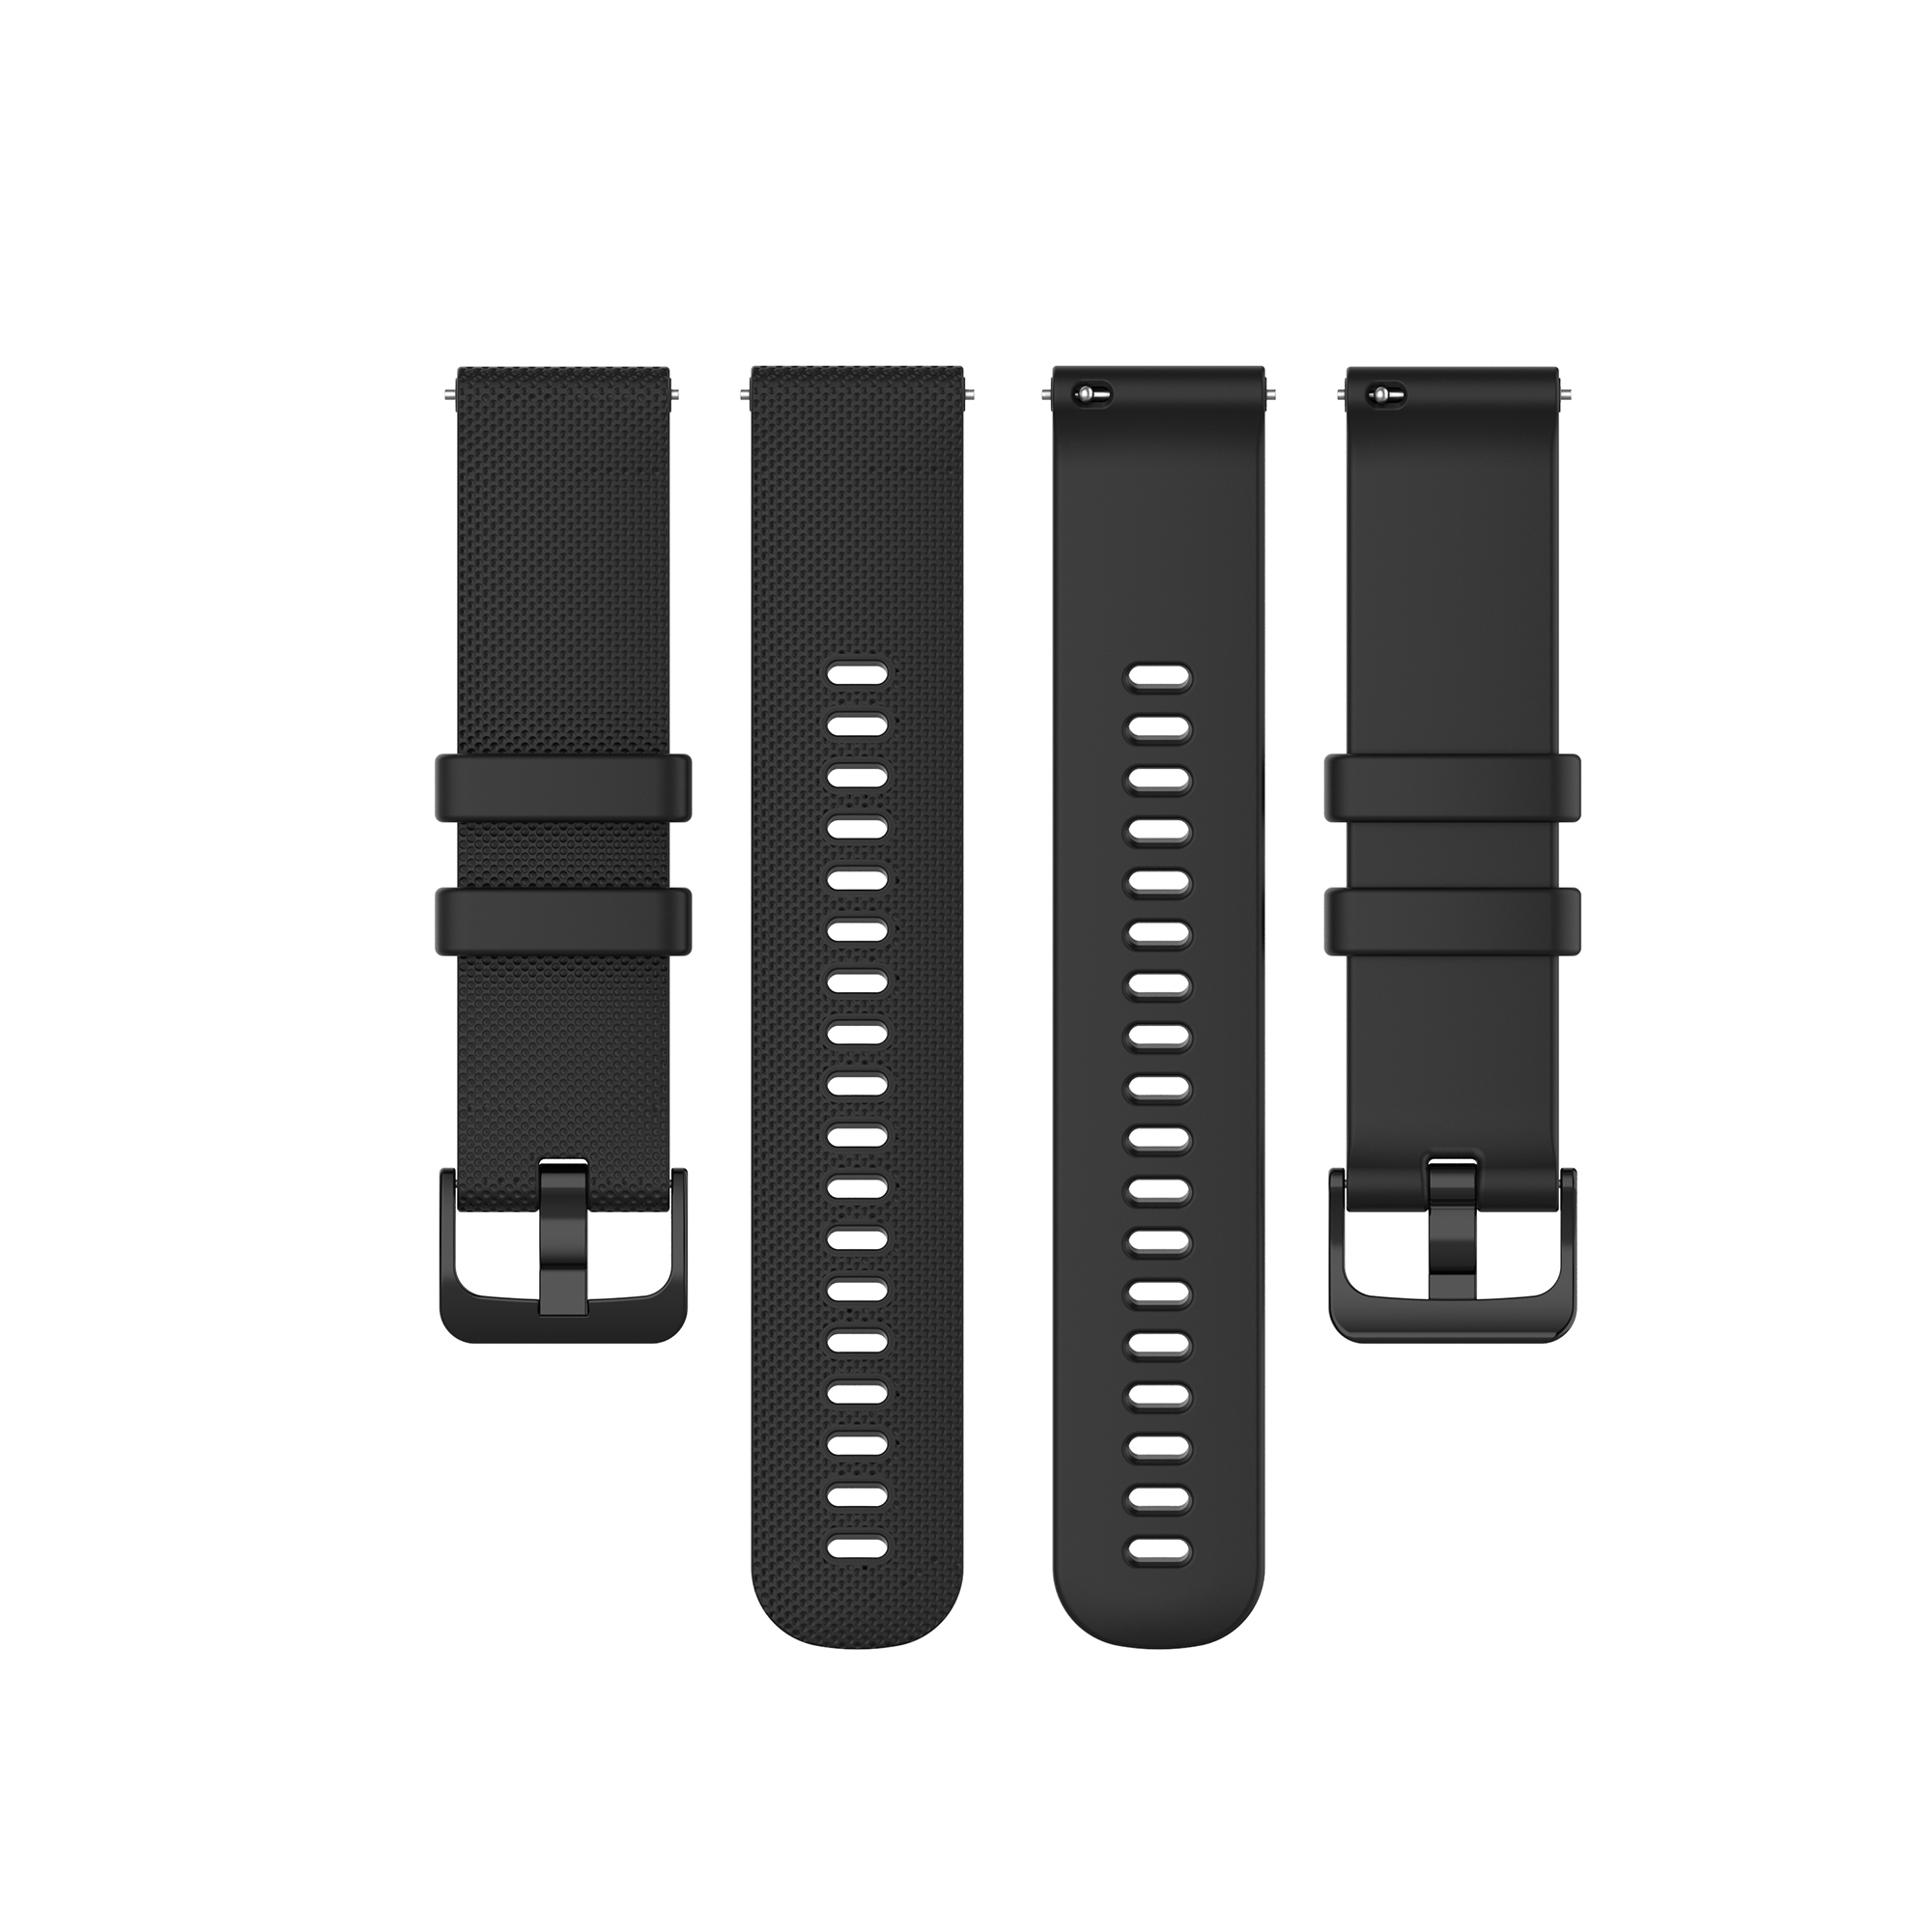 20mm-Width-Soft-Silicone-Watch-Band-Watch-Strap-Replacement-for-lrmGarmin-Venu-SQ-BW-HL1-HL2-Haylou--1805584-7